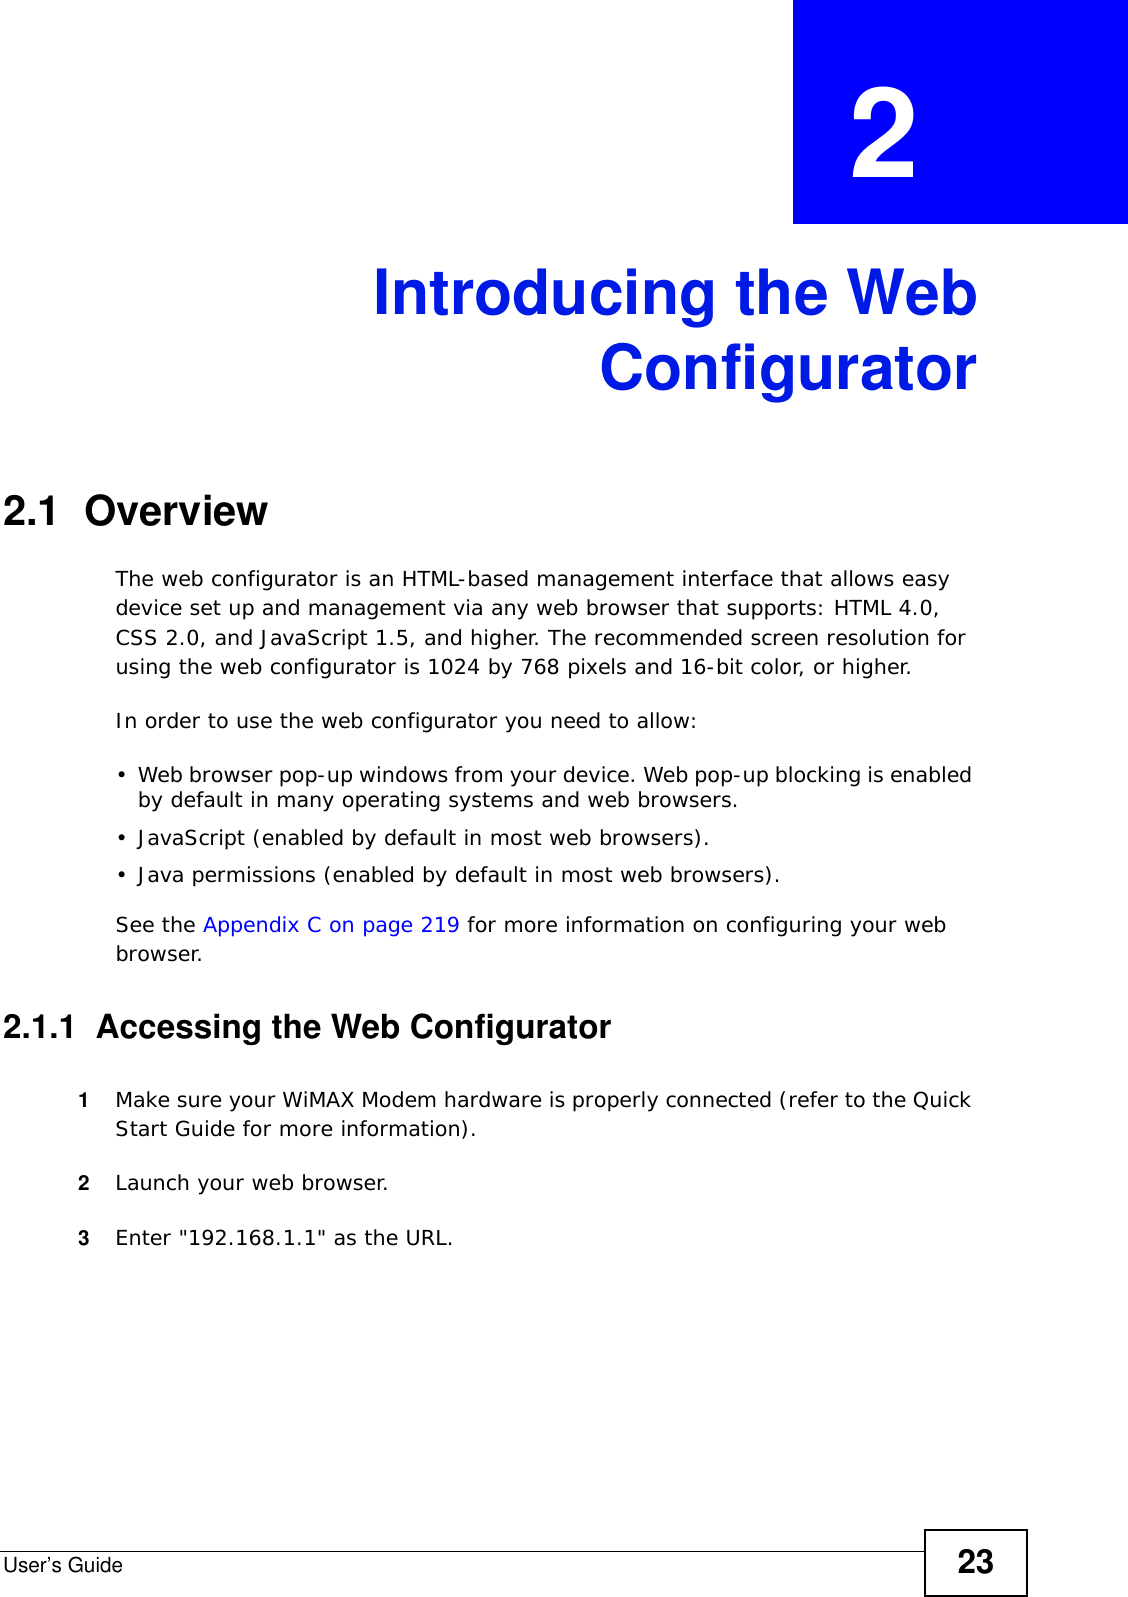 User’s Guide 23CHAPTER  2 Introducing the WebConfigurator2.1  OverviewThe web configurator is an HTML-based management interface that allows easy device set up and management via any web browser that supports: HTML 4.0, CSS 2.0, and JavaScript 1.5, and higher. The recommended screen resolution for using the web configurator is 1024 by 768 pixels and 16-bit color, or higher.In order to use the web configurator you need to allow:• Web browser pop-up windows from your device. Web pop-up blocking is enabled by default in many operating systems and web browsers.• JavaScript (enabled by default in most web browsers).• Java permissions (enabled by default in most web browsers).See the Appendix C on page 219 for more information on configuring your web browser.2.1.1  Accessing the Web Configurator1Make sure your WiMAX Modem hardware is properly connected (refer to the Quick Start Guide for more information).2Launch your web browser.3Enter &quot;192.168.1.1&quot; as the URL.